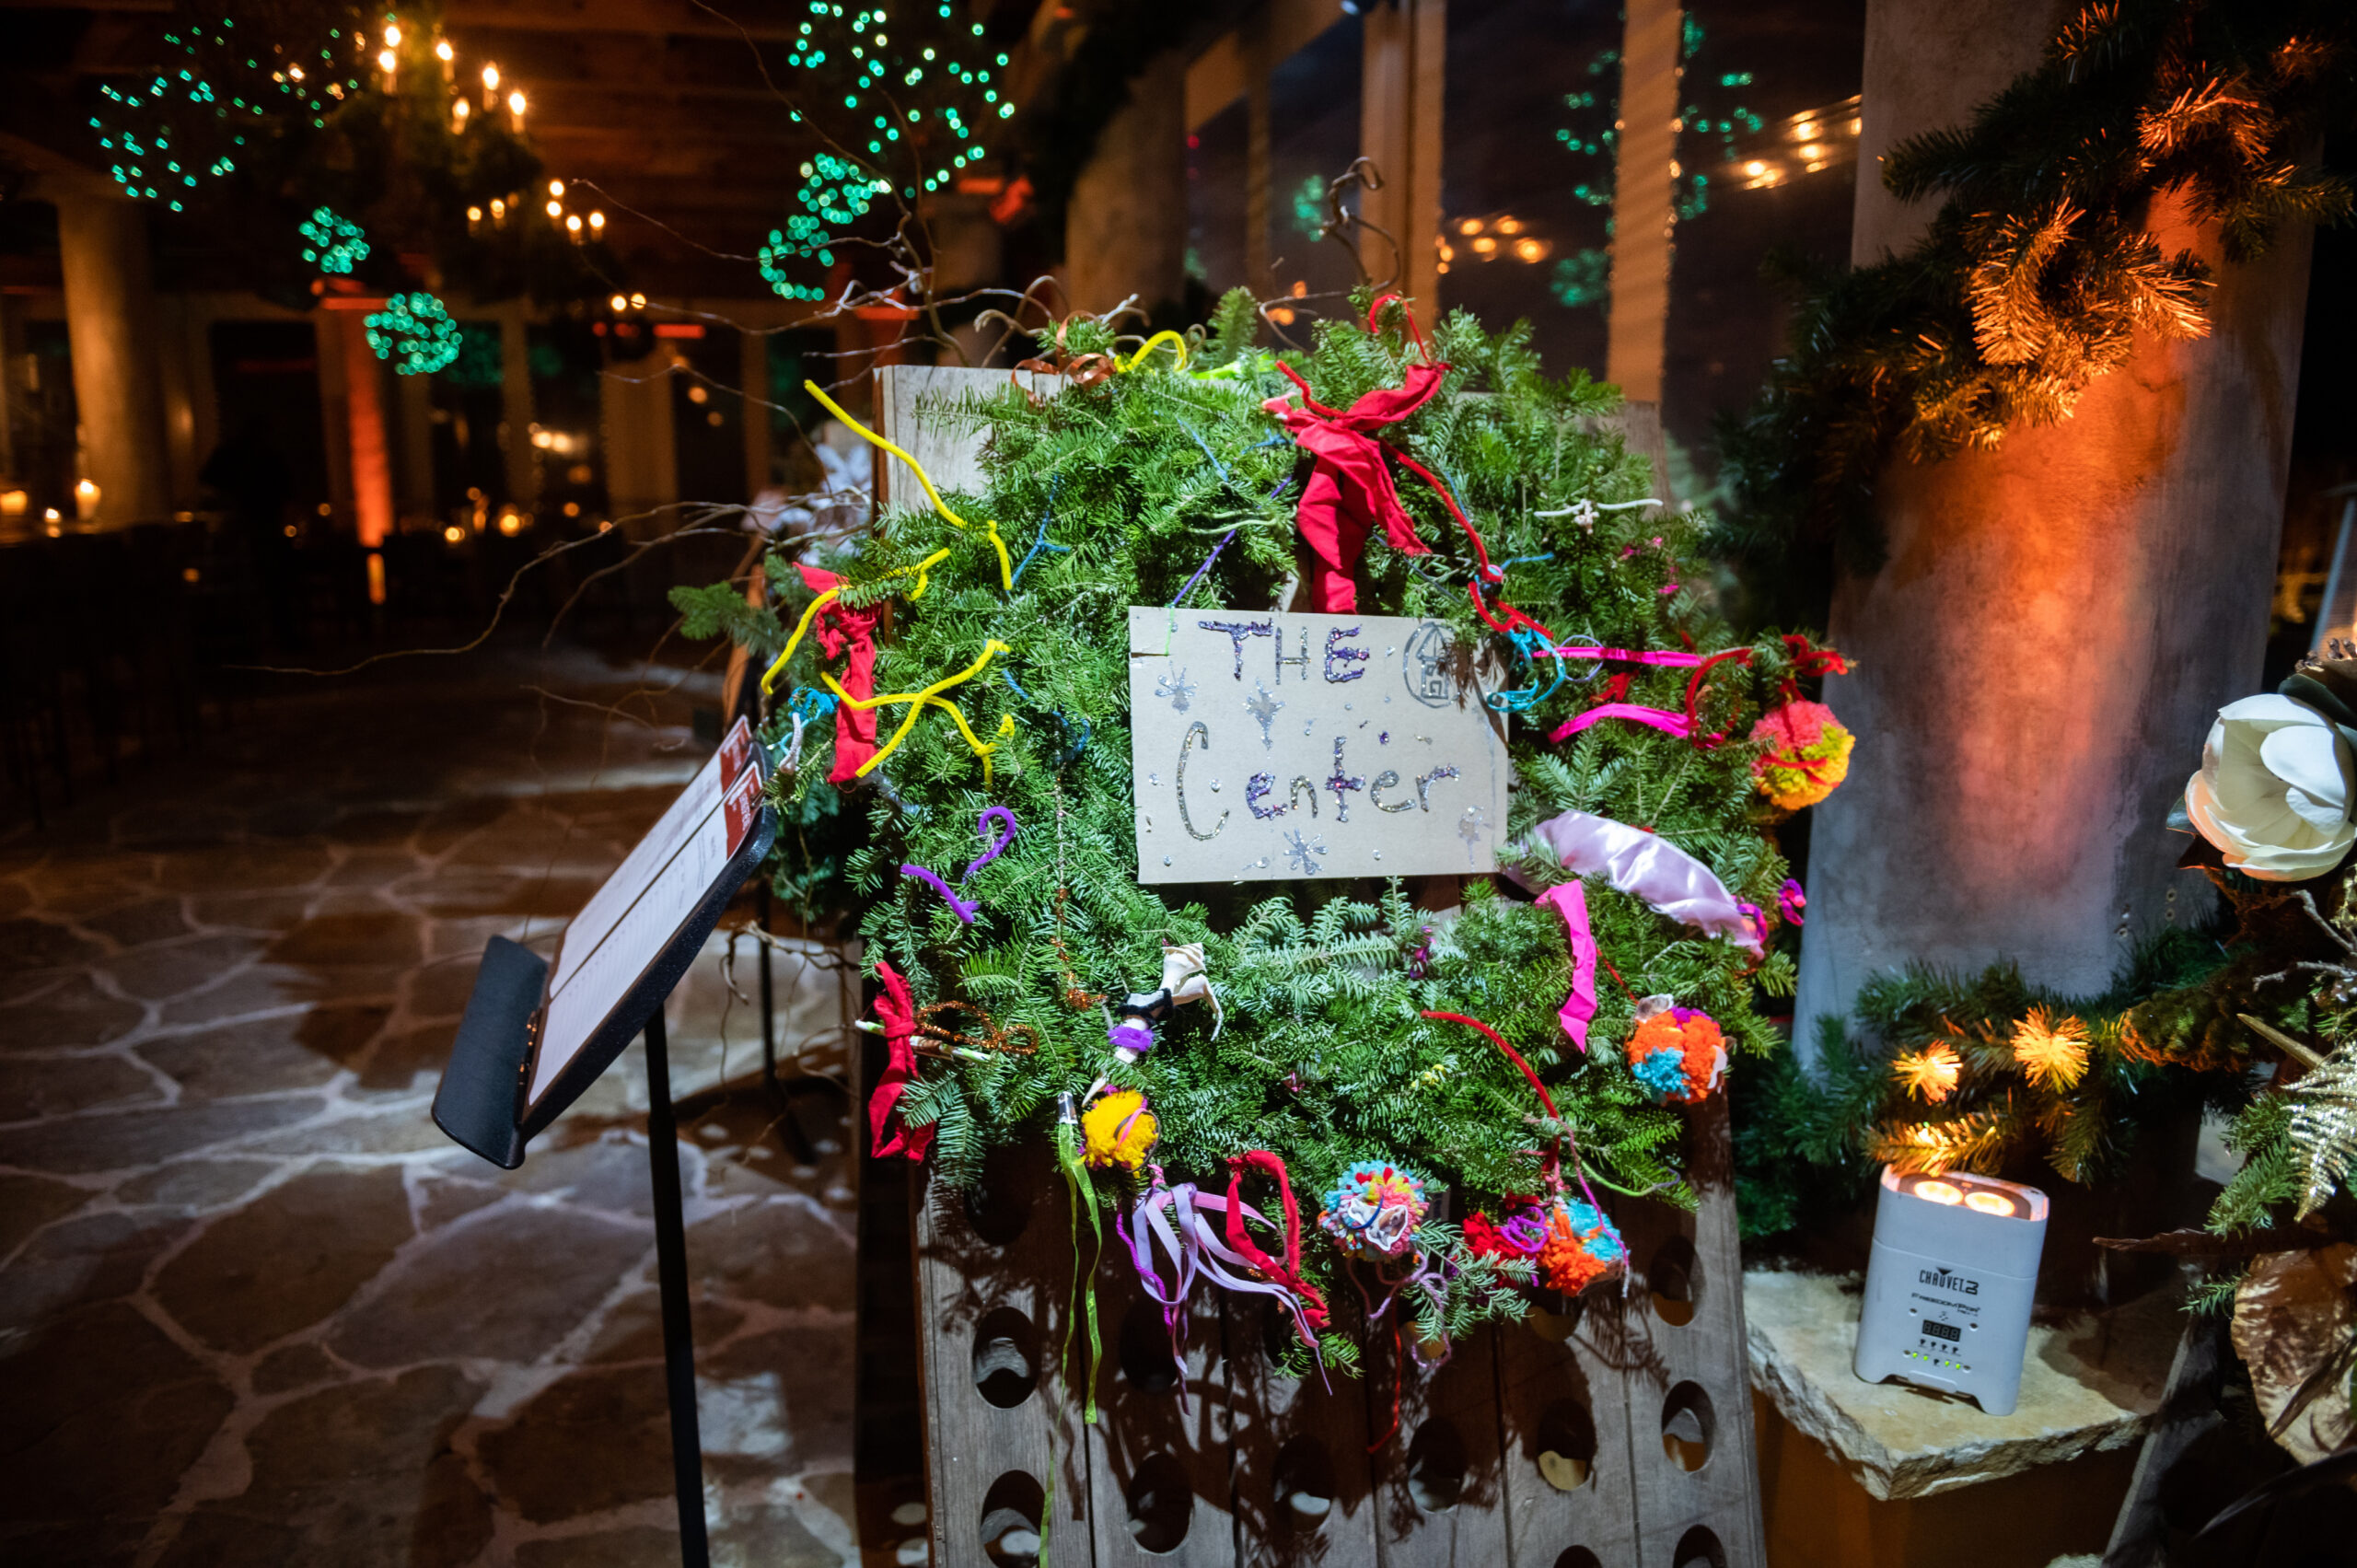 Wolffer Estate's annual charity wreath auction at the Lighting of the Vines is a fundraiser for the Bridgehampton Child Care and Recreational Center. The wreaths, made by several local artisans and florists, are sold during a silent auction and 100 percent of the proceeds go to the Center. MARK KOPKO